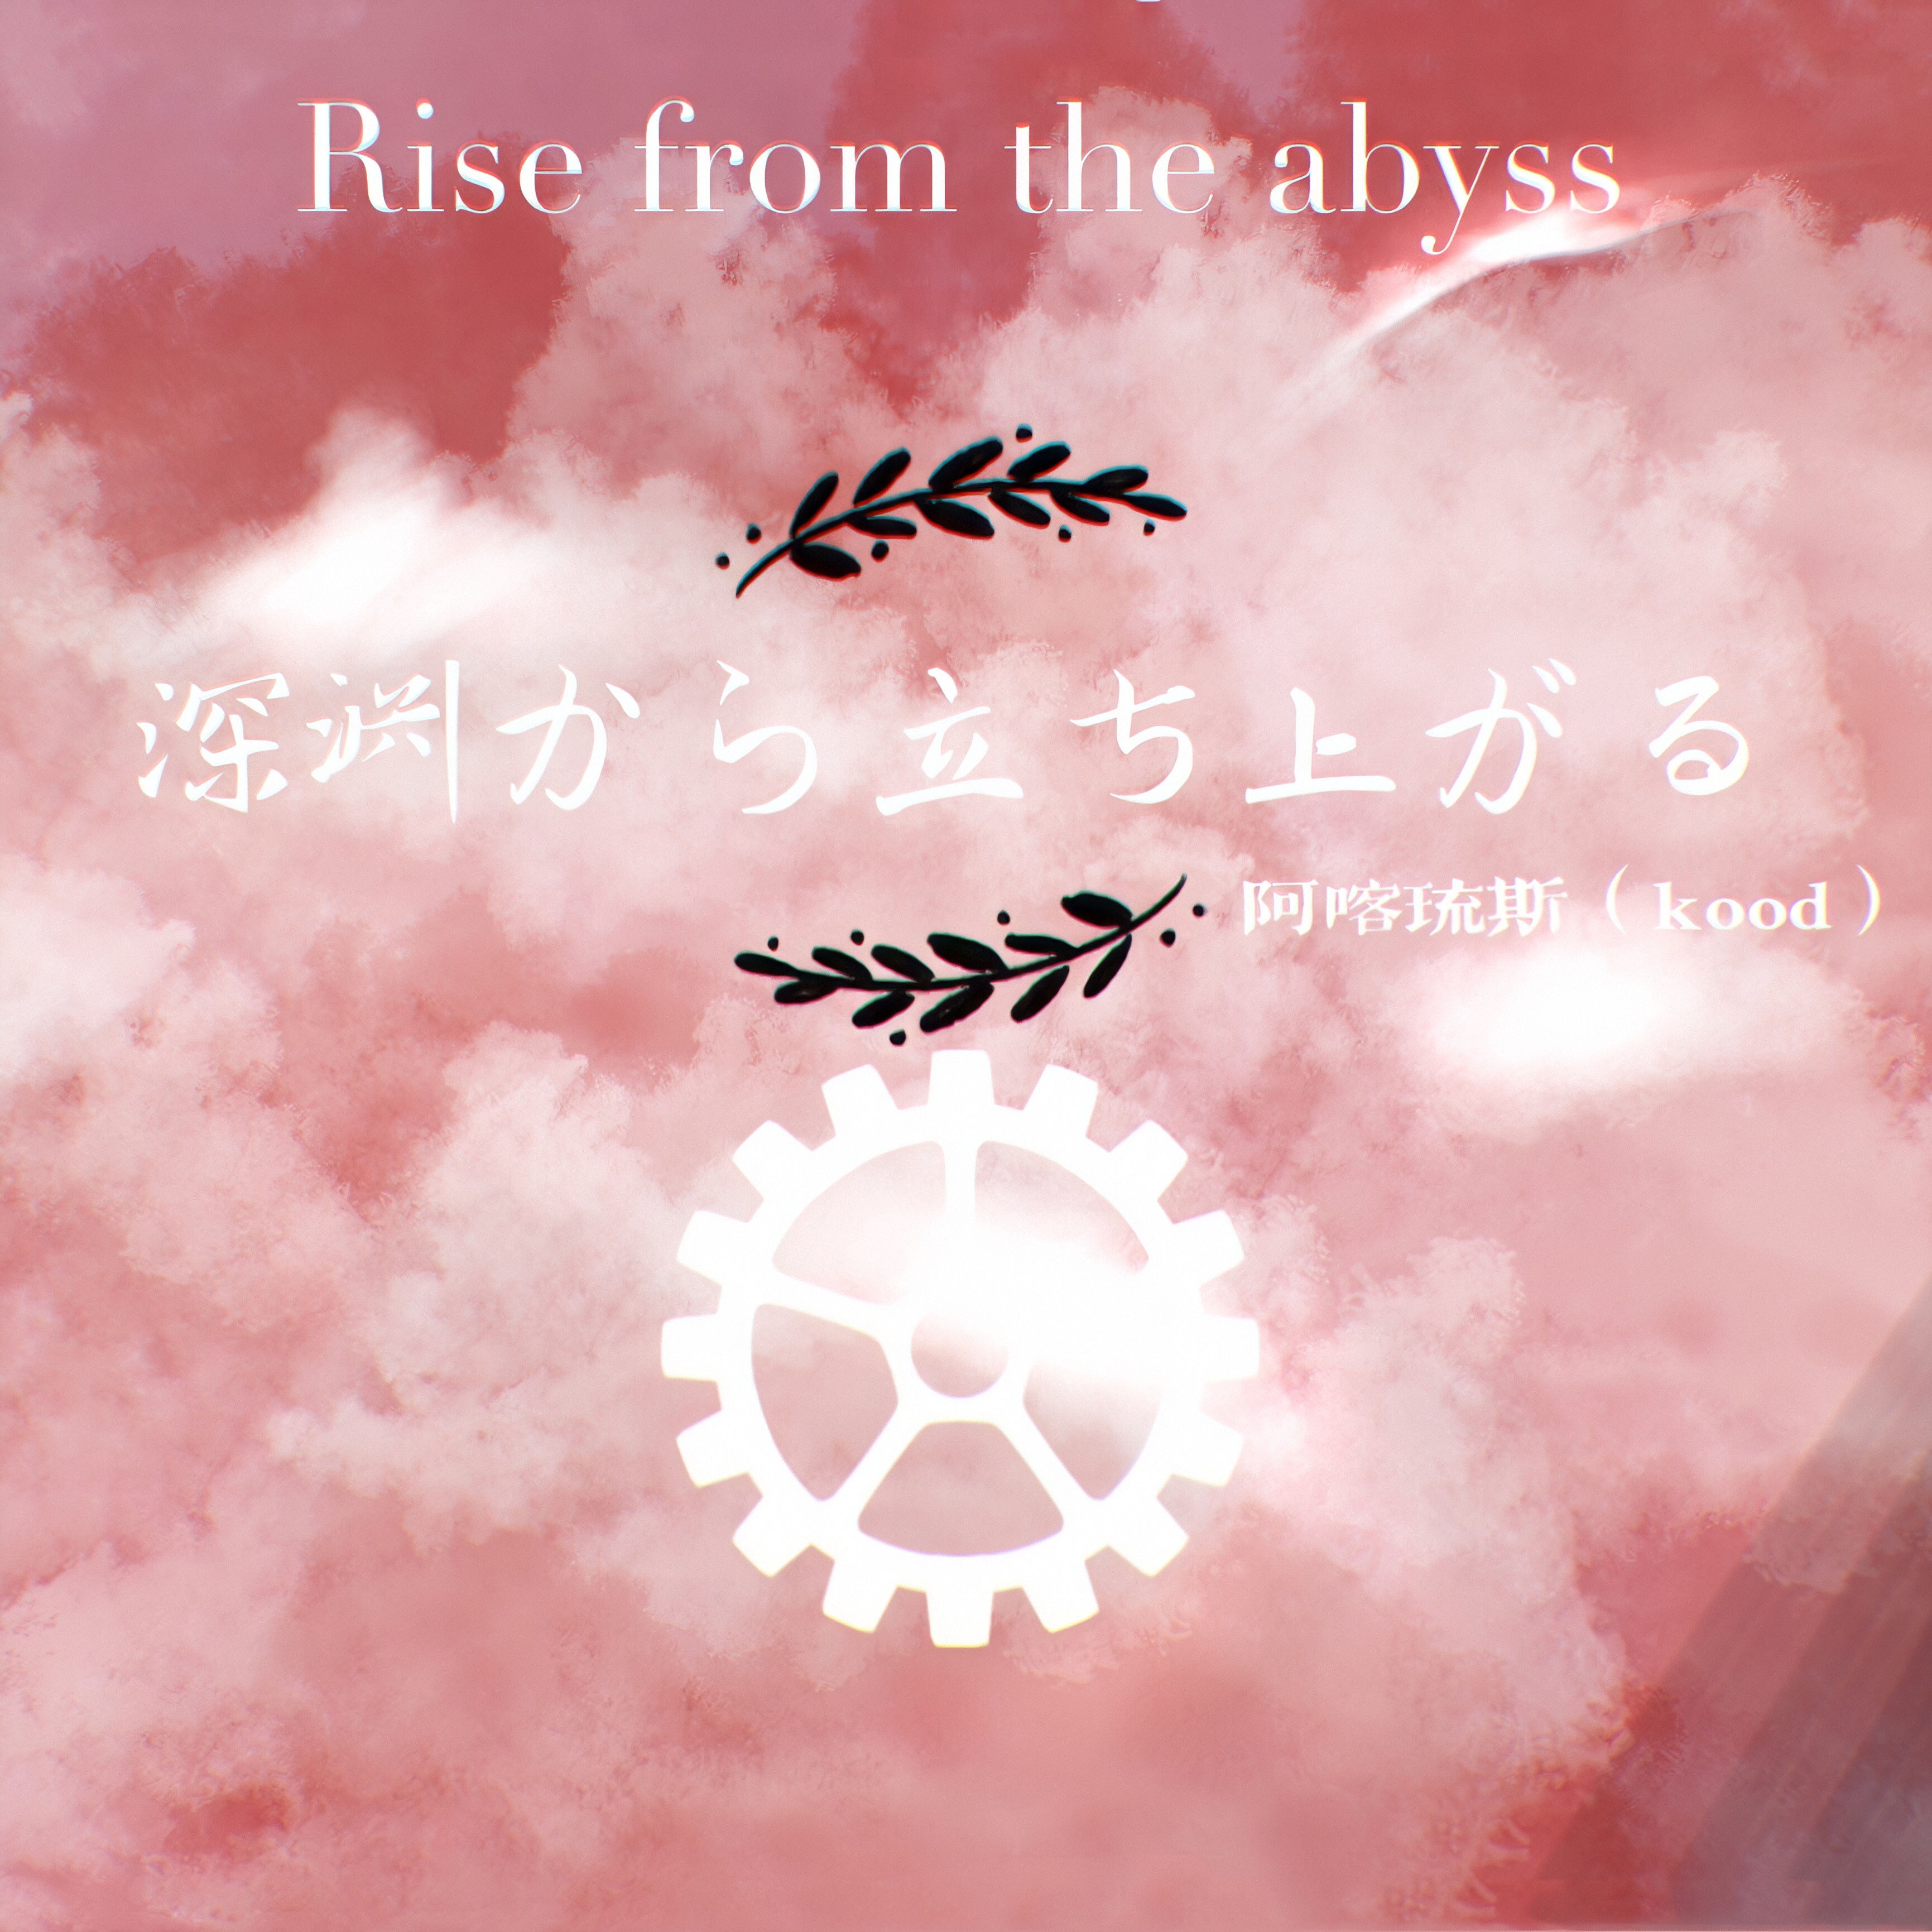 《Rise from the abyss》插画图片壁纸